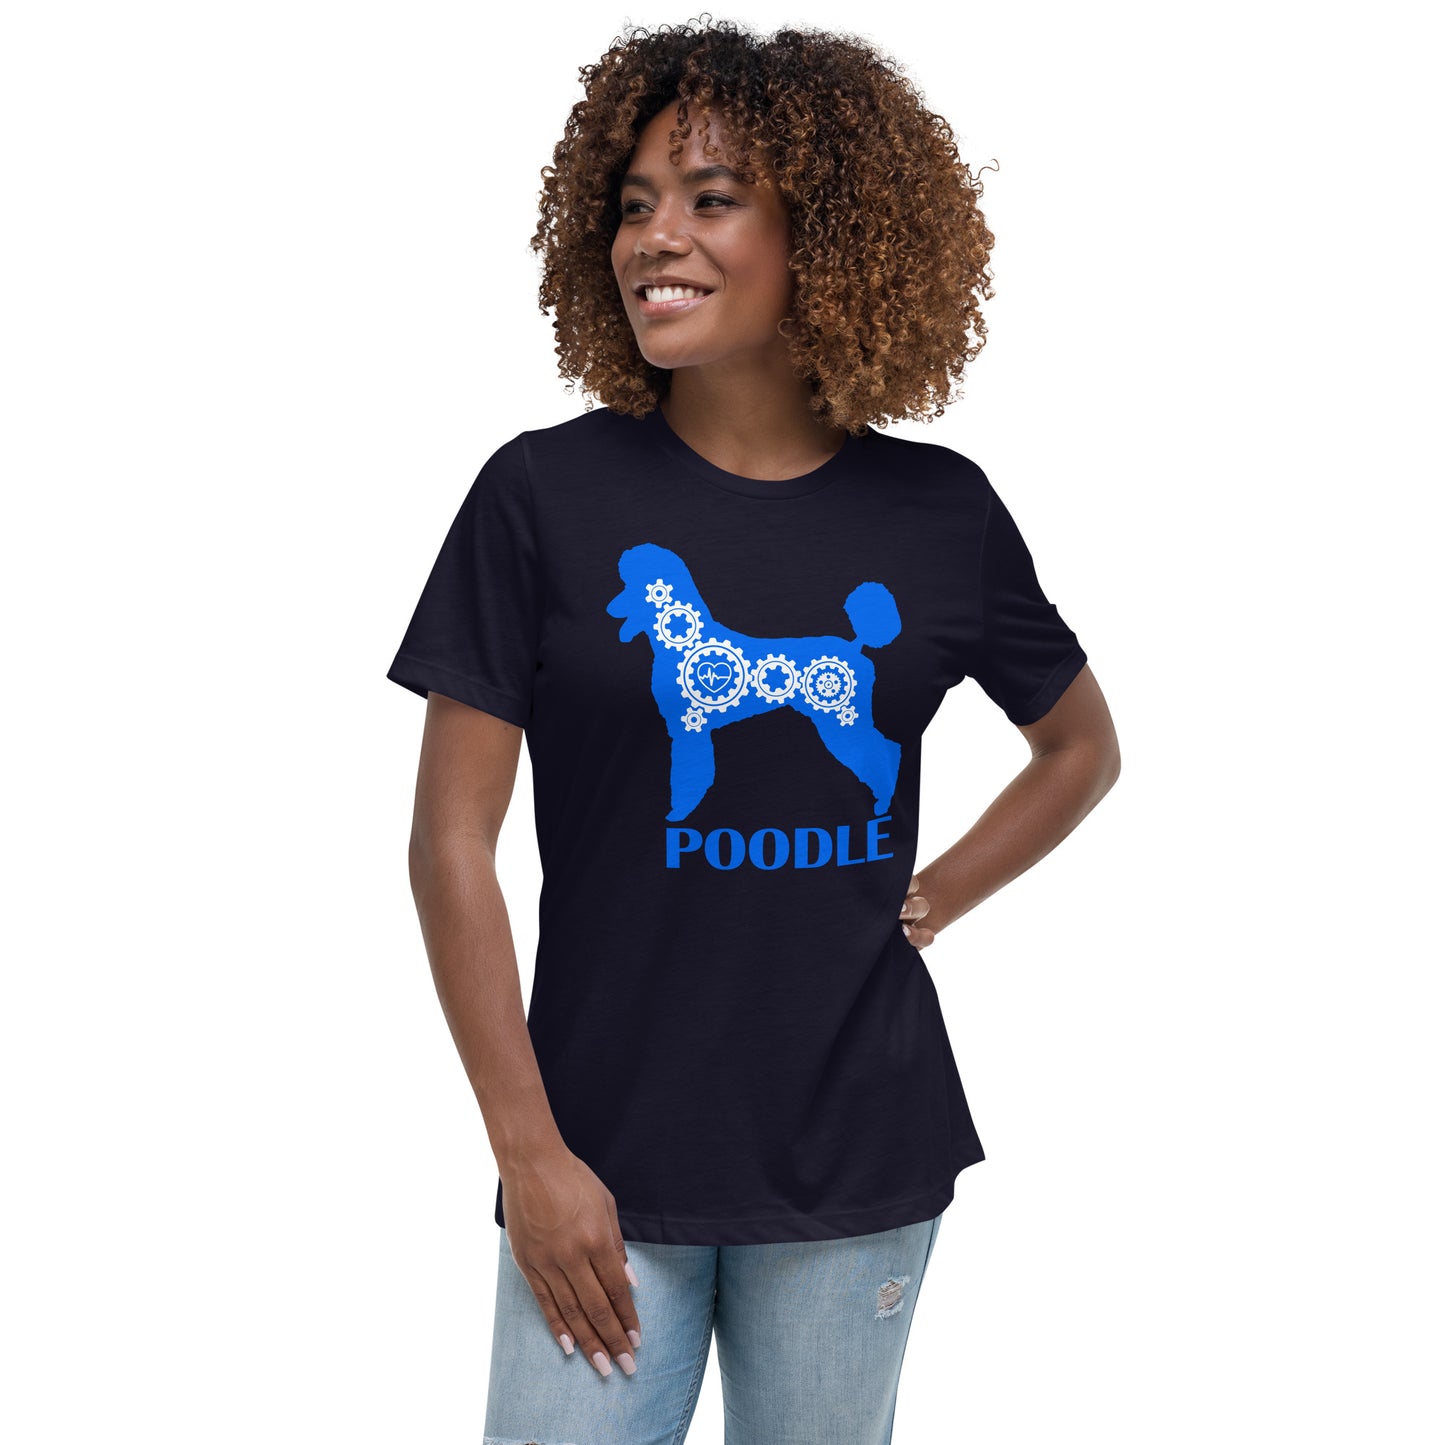 Poodle Bionic women’s navy t-shirt by Dog Artistry.